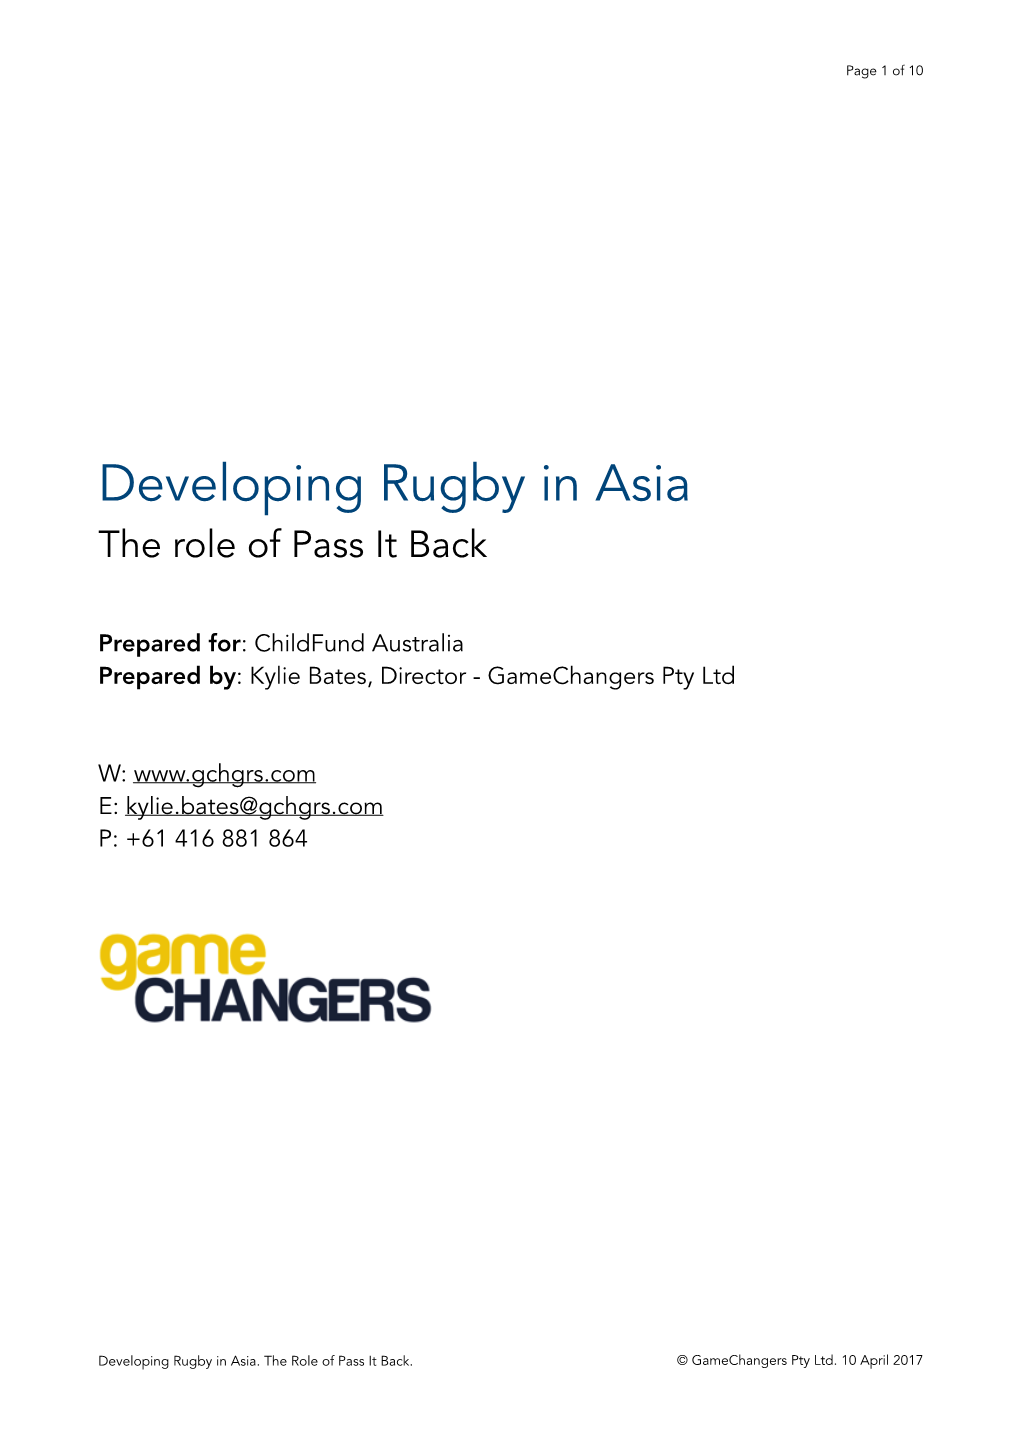 Developing Rugby in Asia.Pages